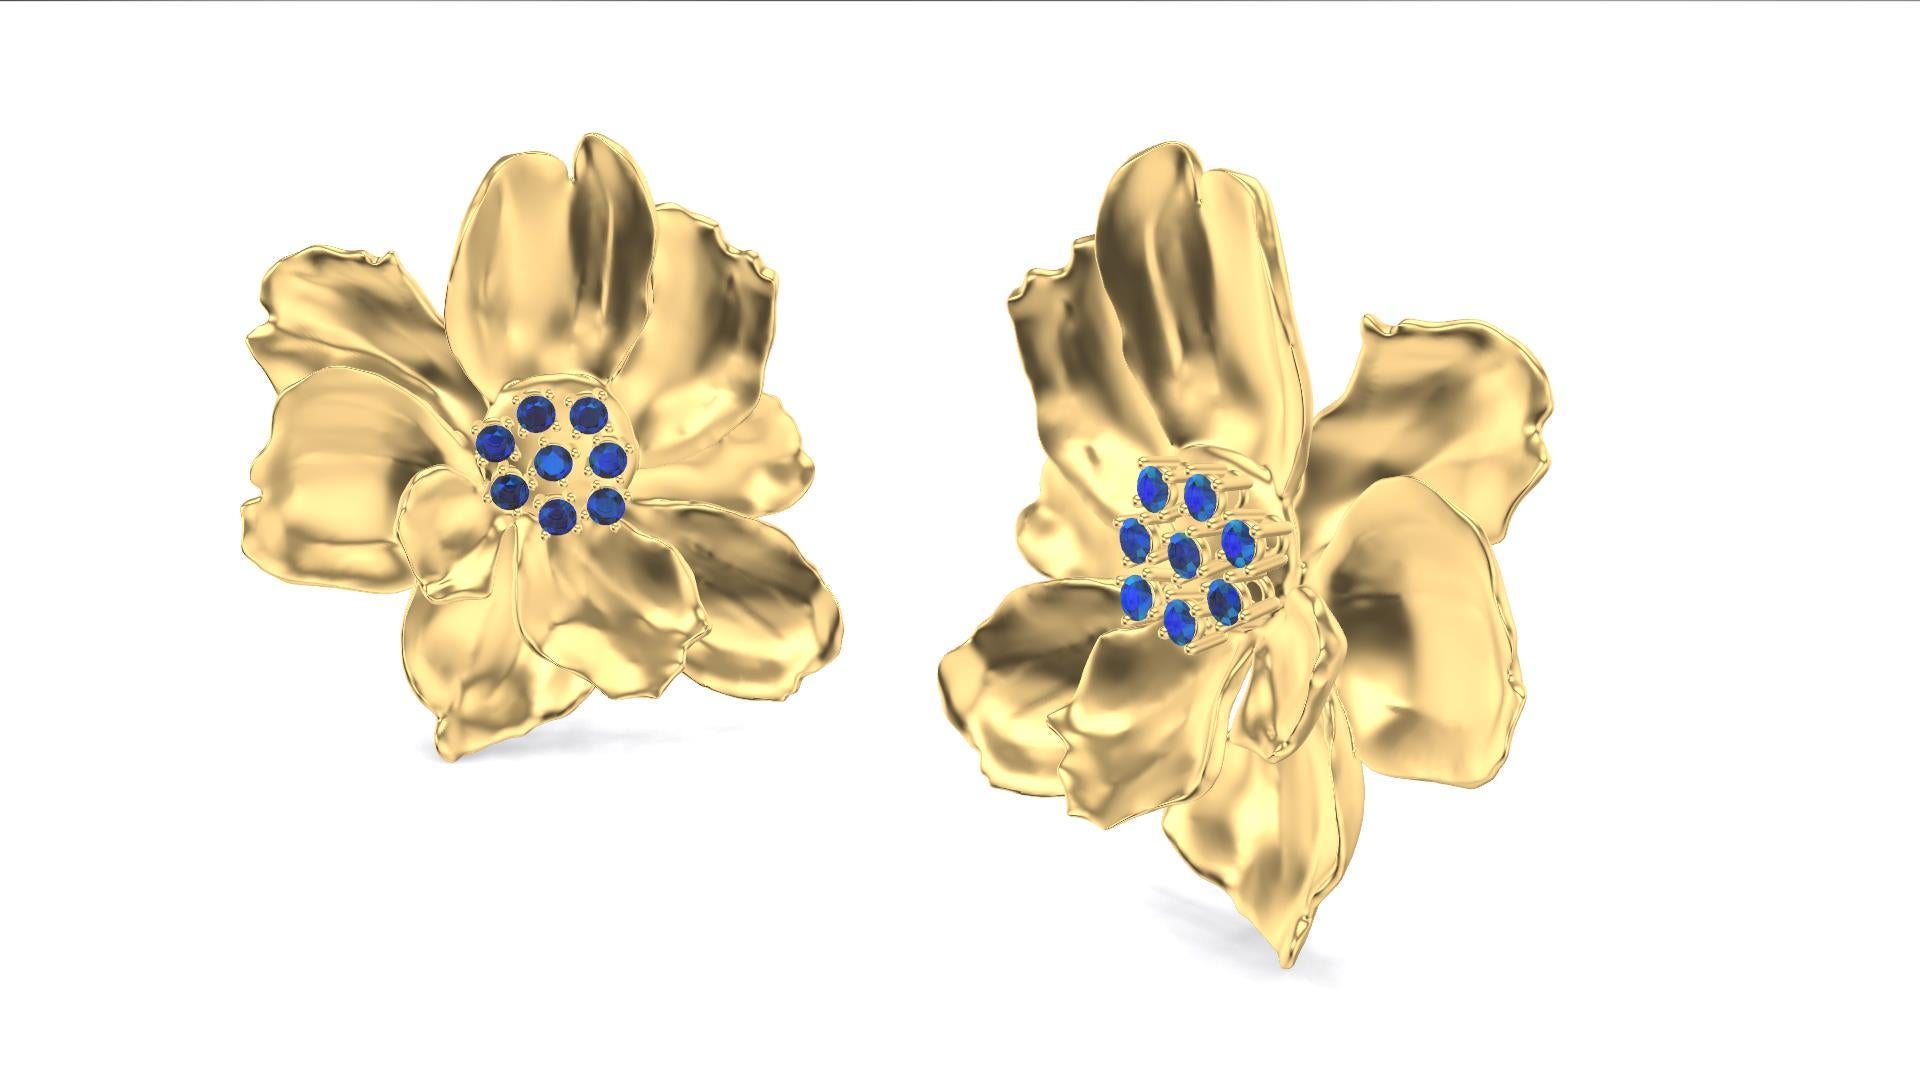 14 Karat Yellow Gold Wild Flower Earrings with Sapphires, Tiffany Designer Thomas Kurilla sculpted these exclusively for 1stdibs. Boredom causes us to challenge ourselves. Working from life especially during the covid  virus could push us two ways .